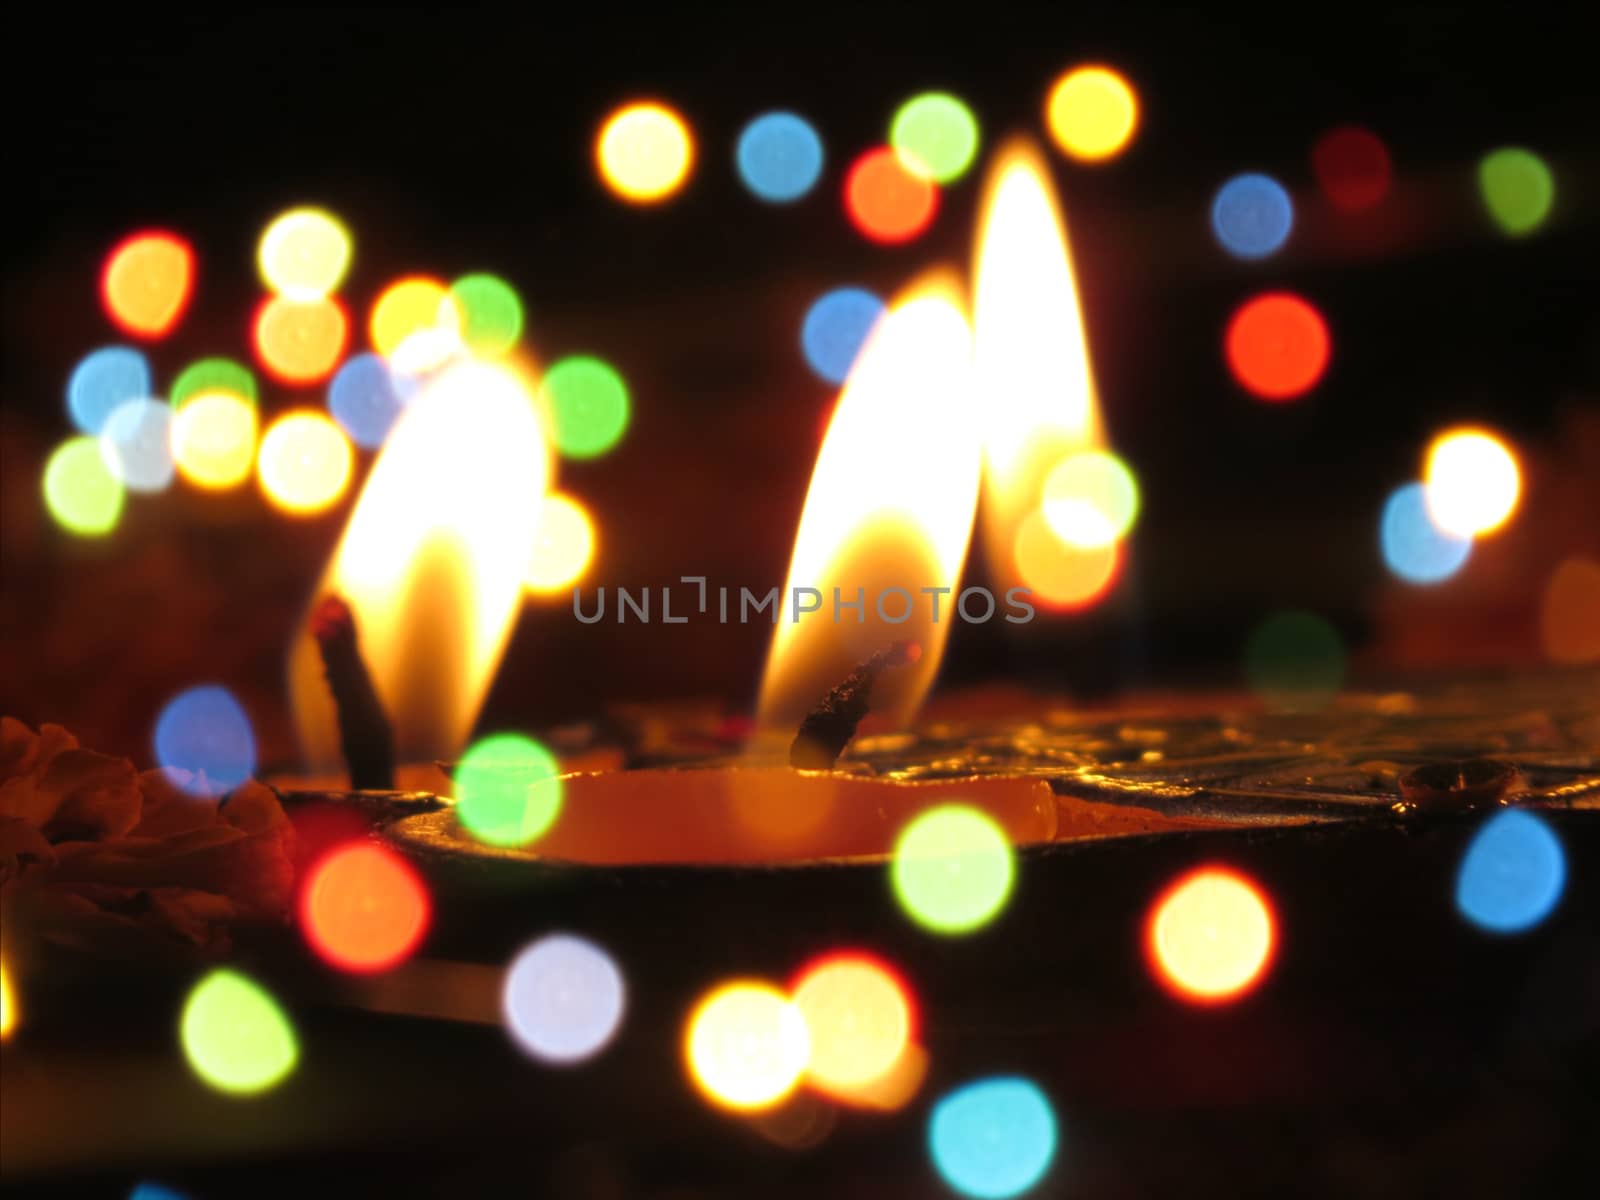 An abstract view of traditional Diwali lamps in colorful blur festive lights during Diwali festival in India.